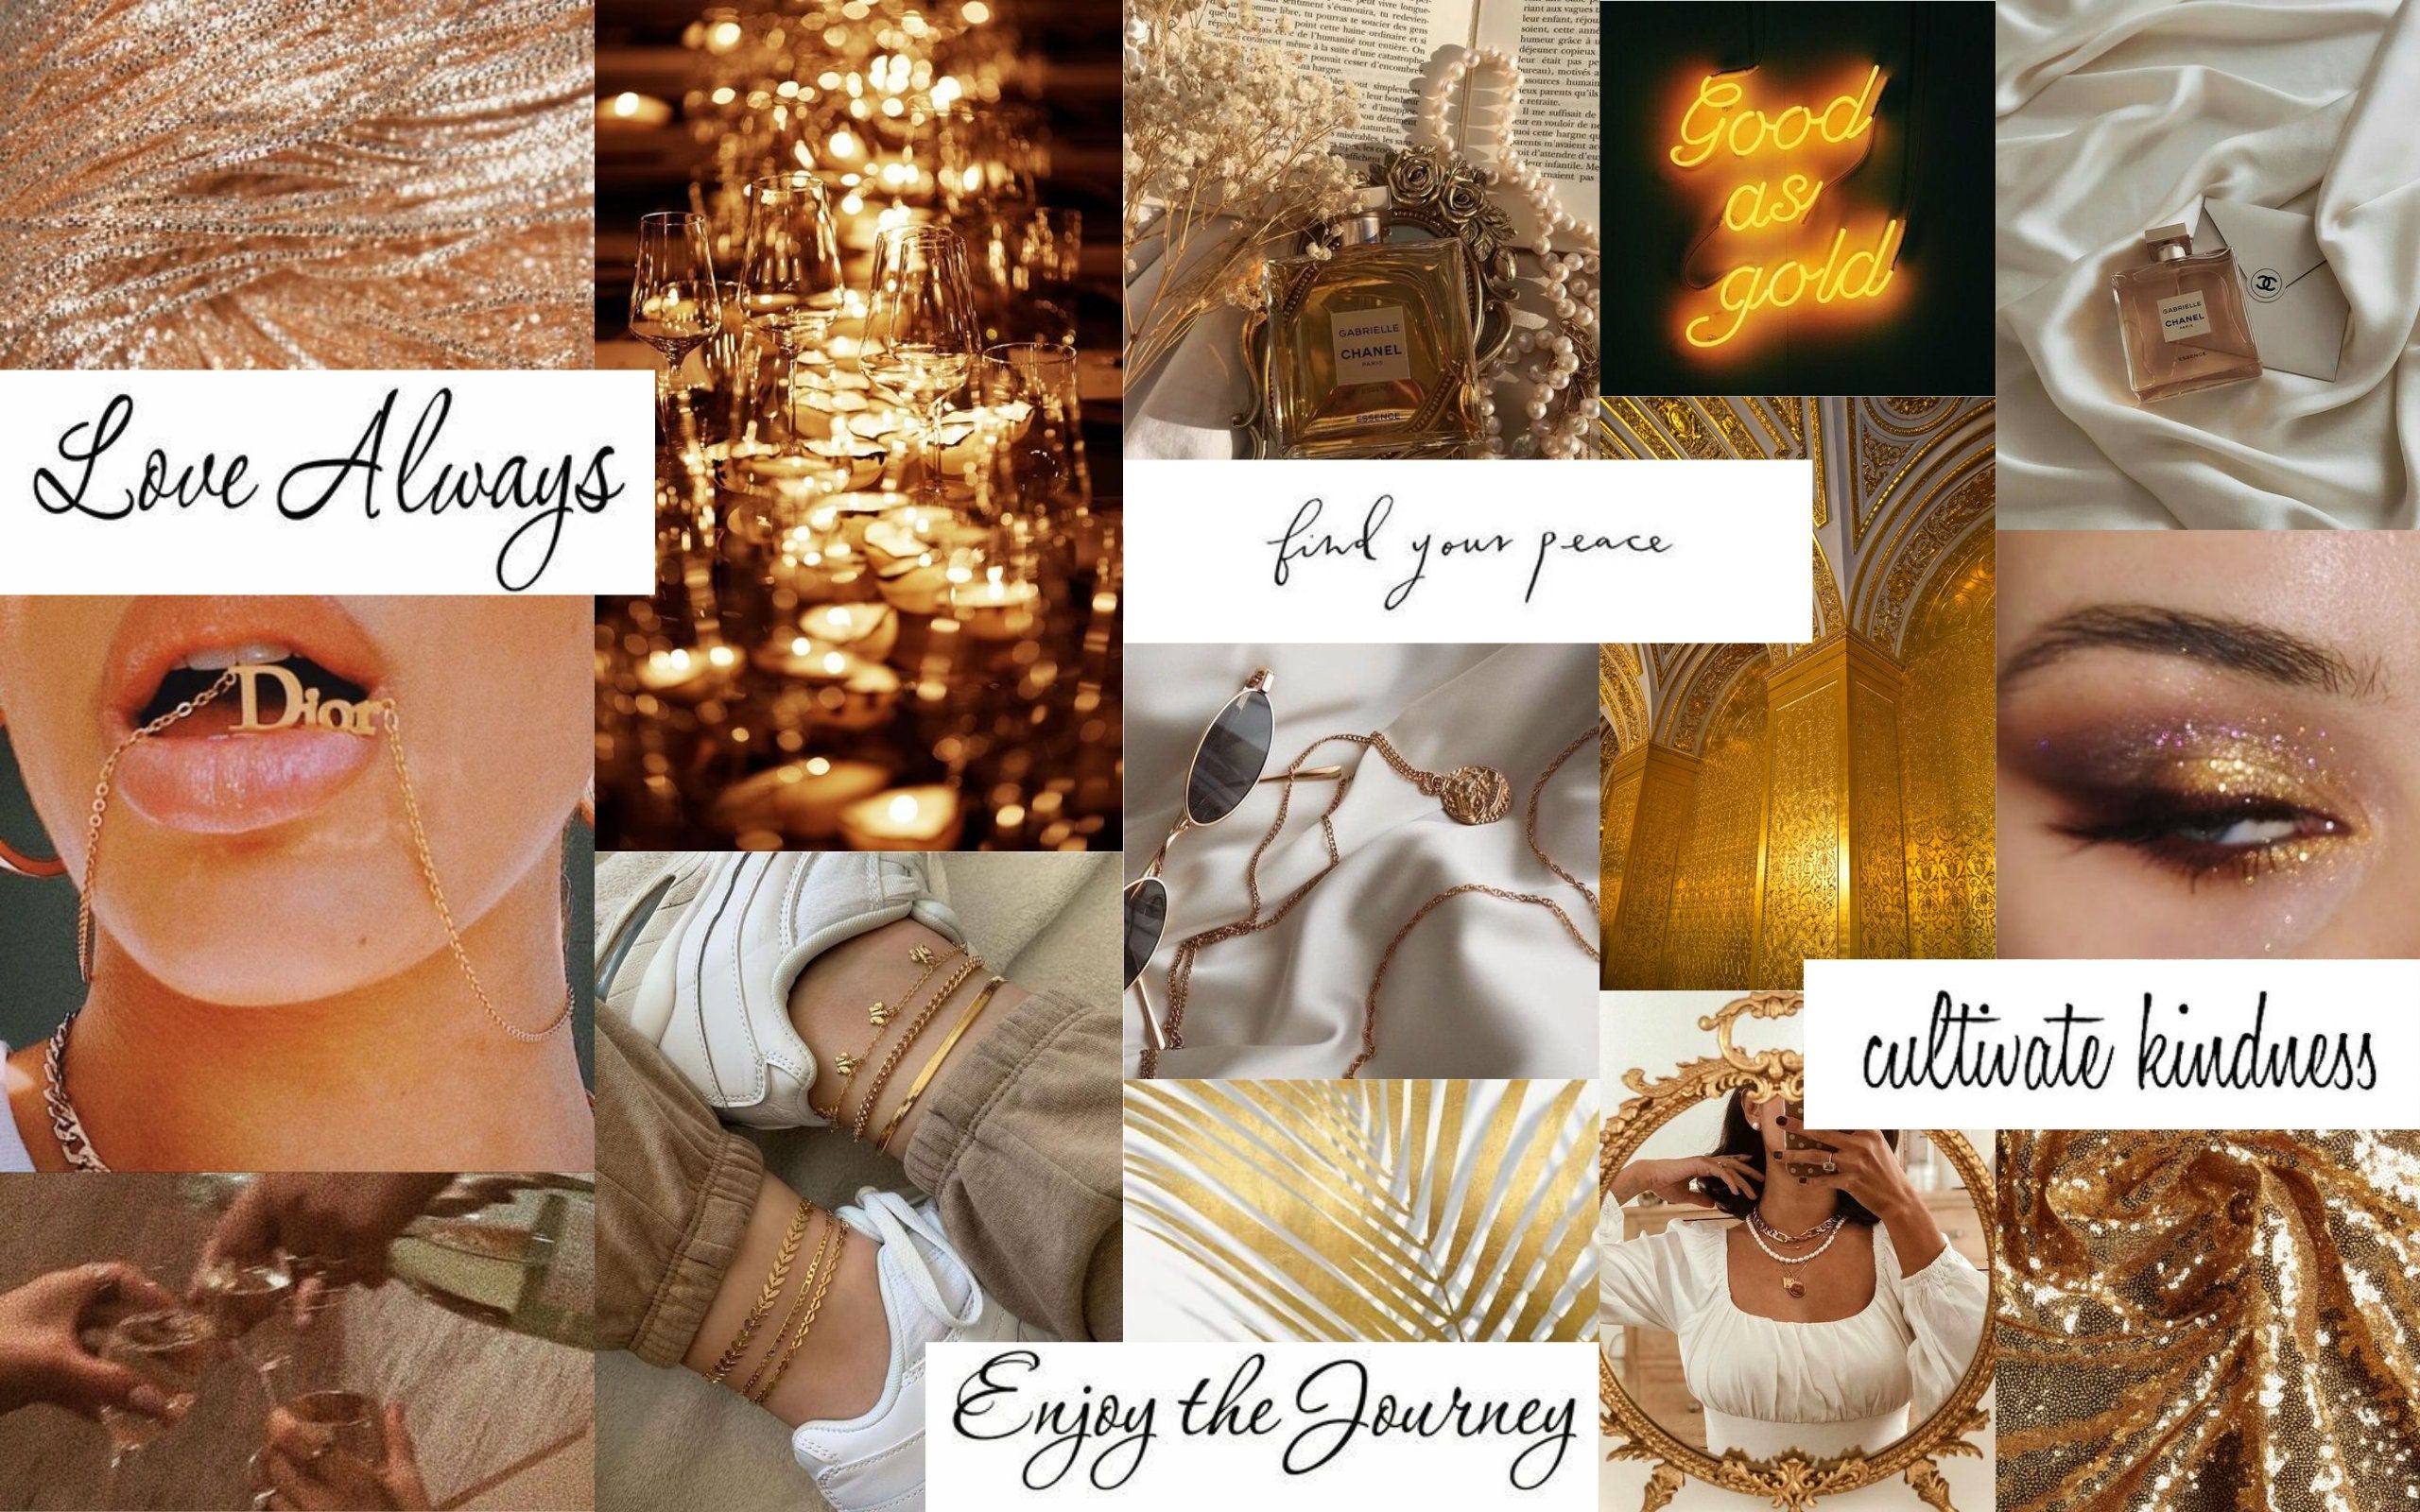 A collage of images with gold and glitter - Gold, collage, school, Chanel